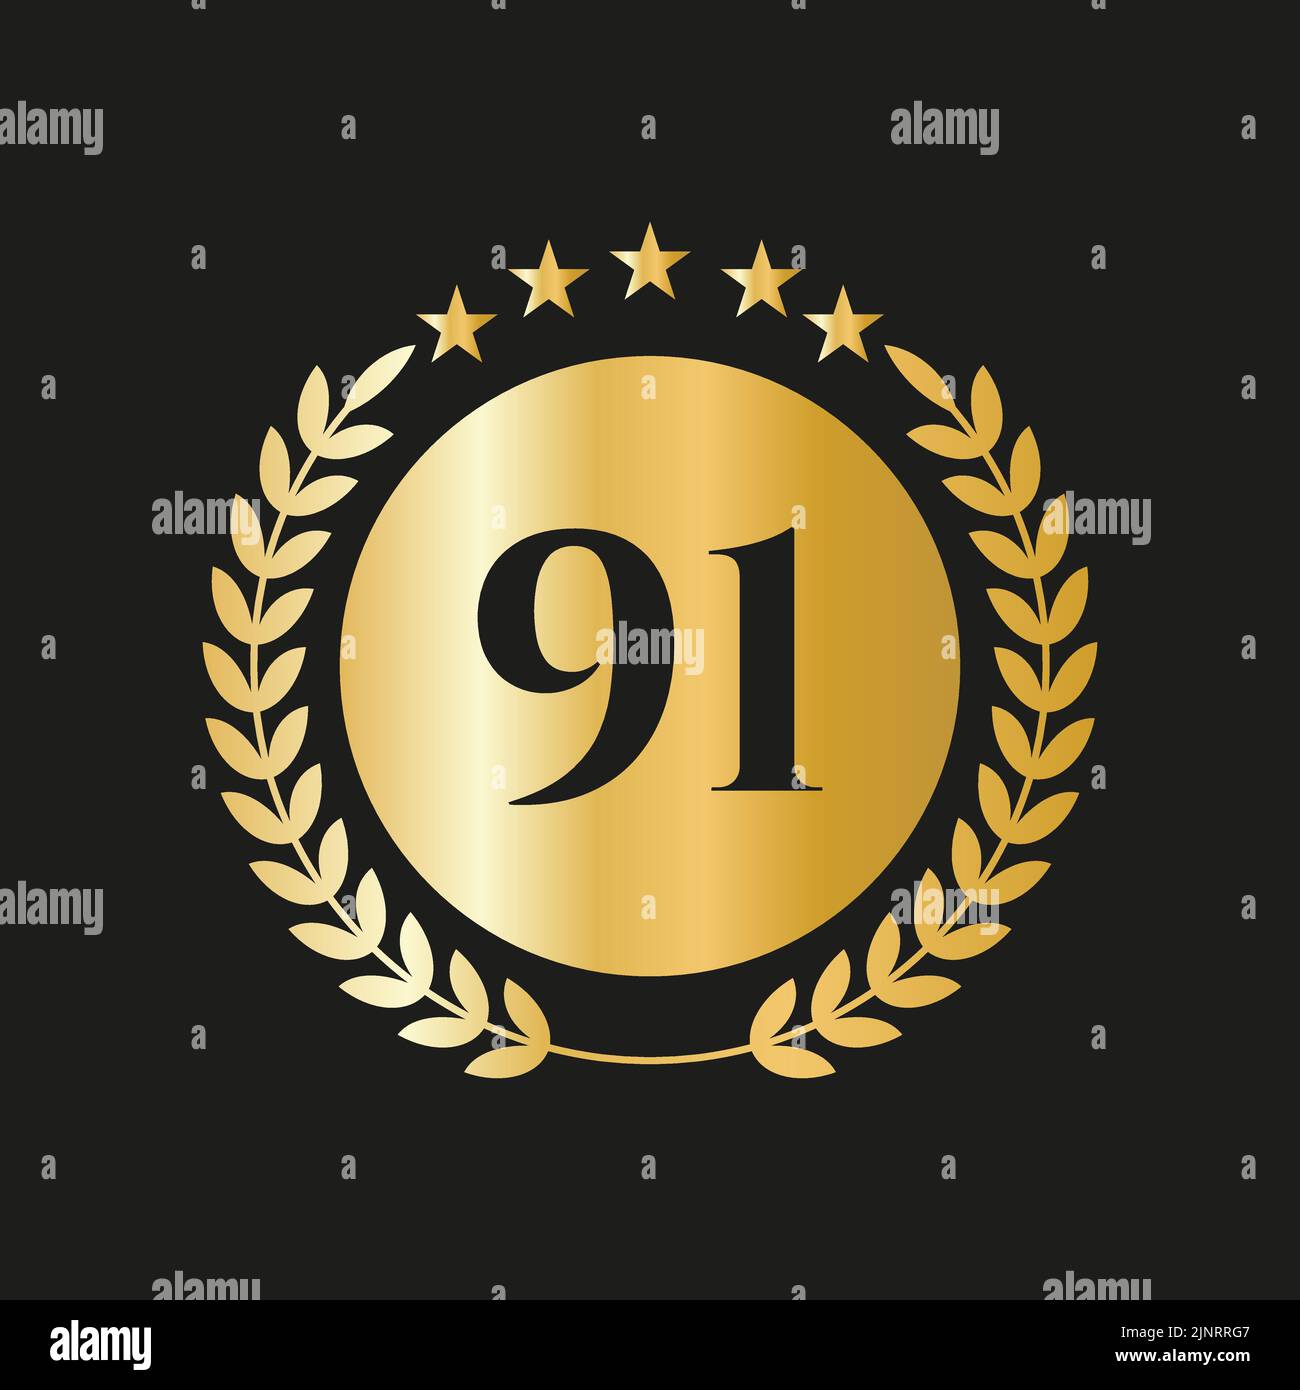 91 Years Anniversary Celebration Icon Vector Logo Design Template With Golden Concept Stock Vector